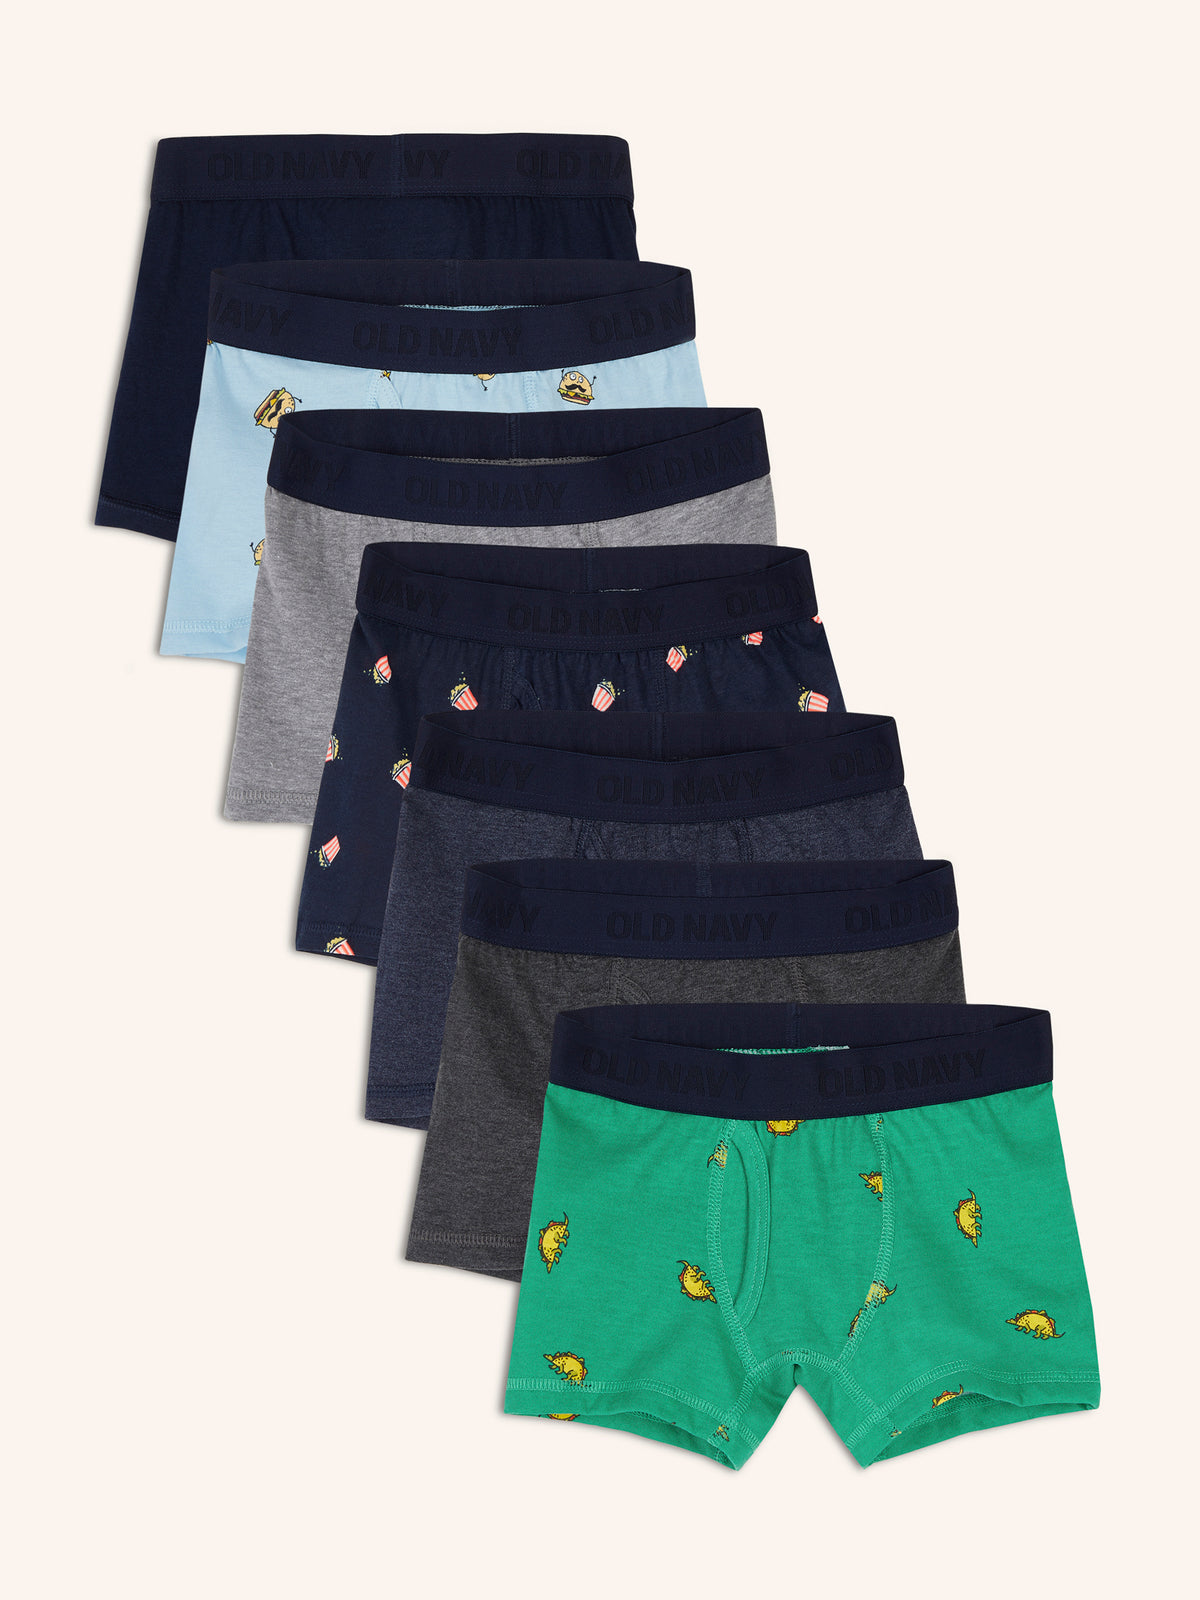 Printed Boxer-Briefs Underwear 7-Pack for Boys - Old Navy Philippines